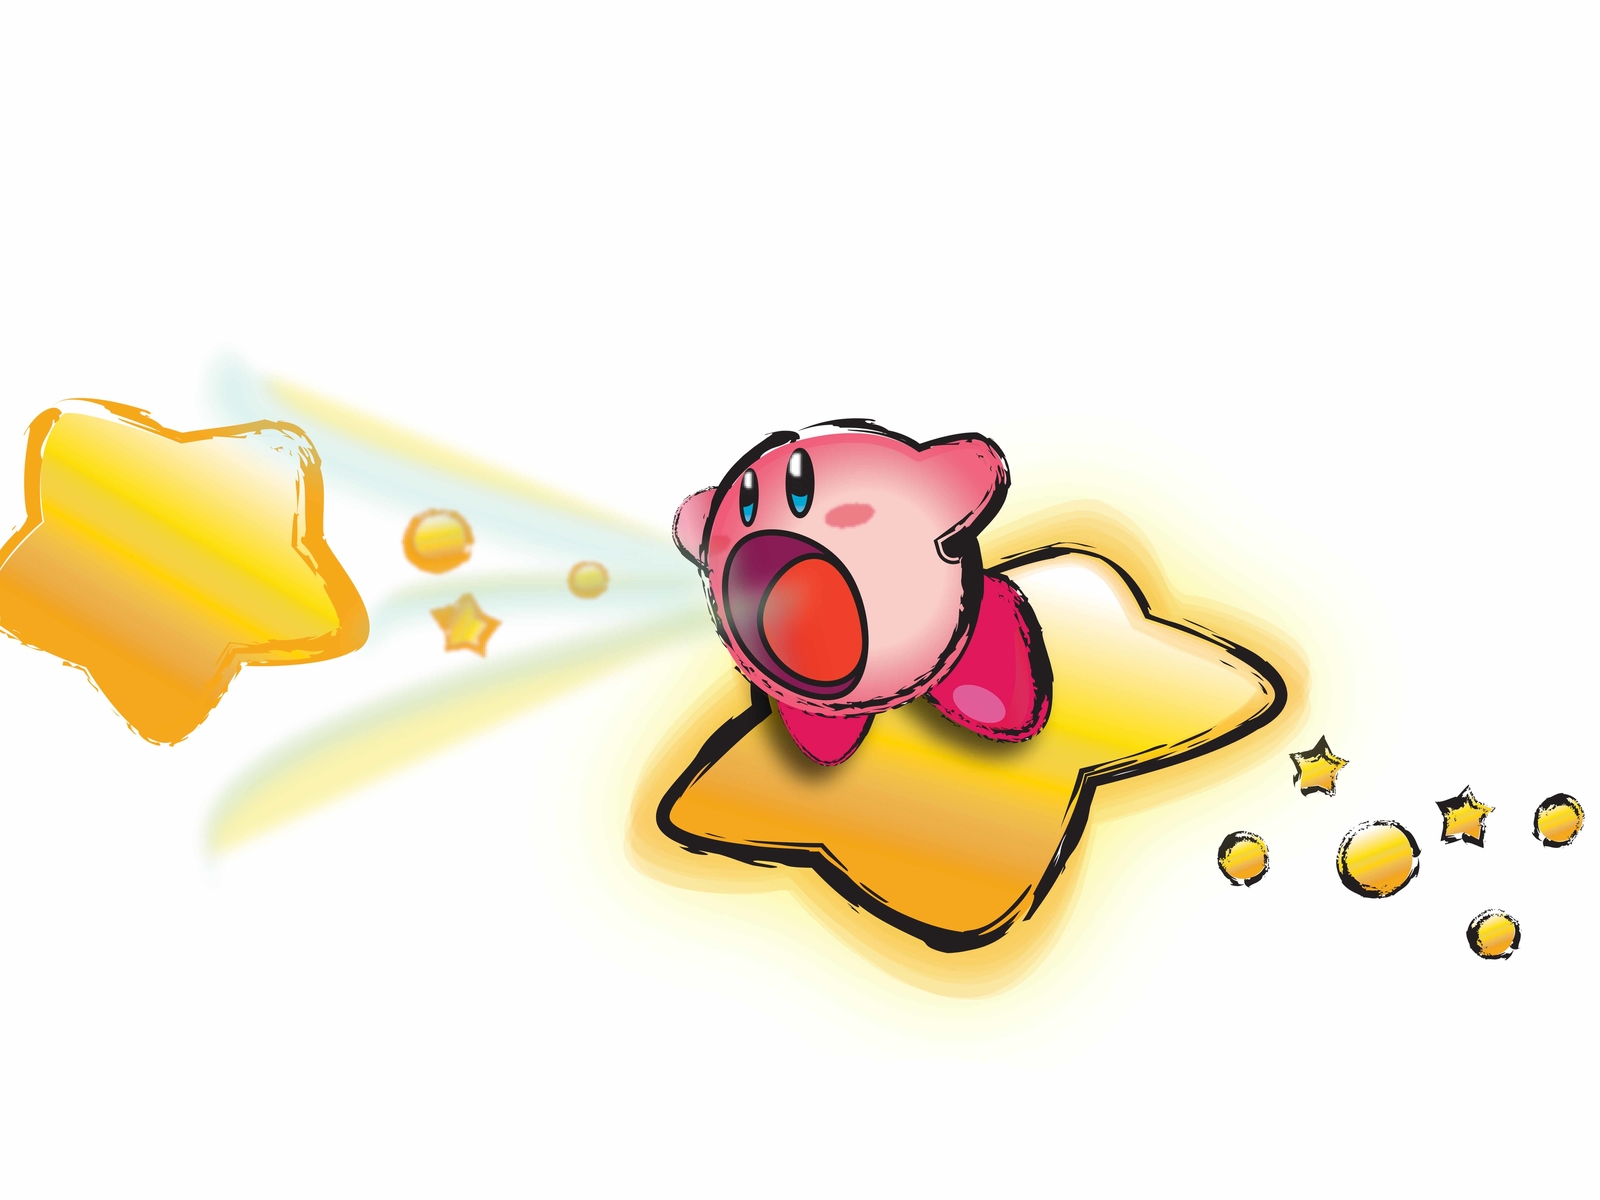 Kirby the Superstar (Super Smash Bros. Ultimate) by Ivan Ramirez on Dribbble